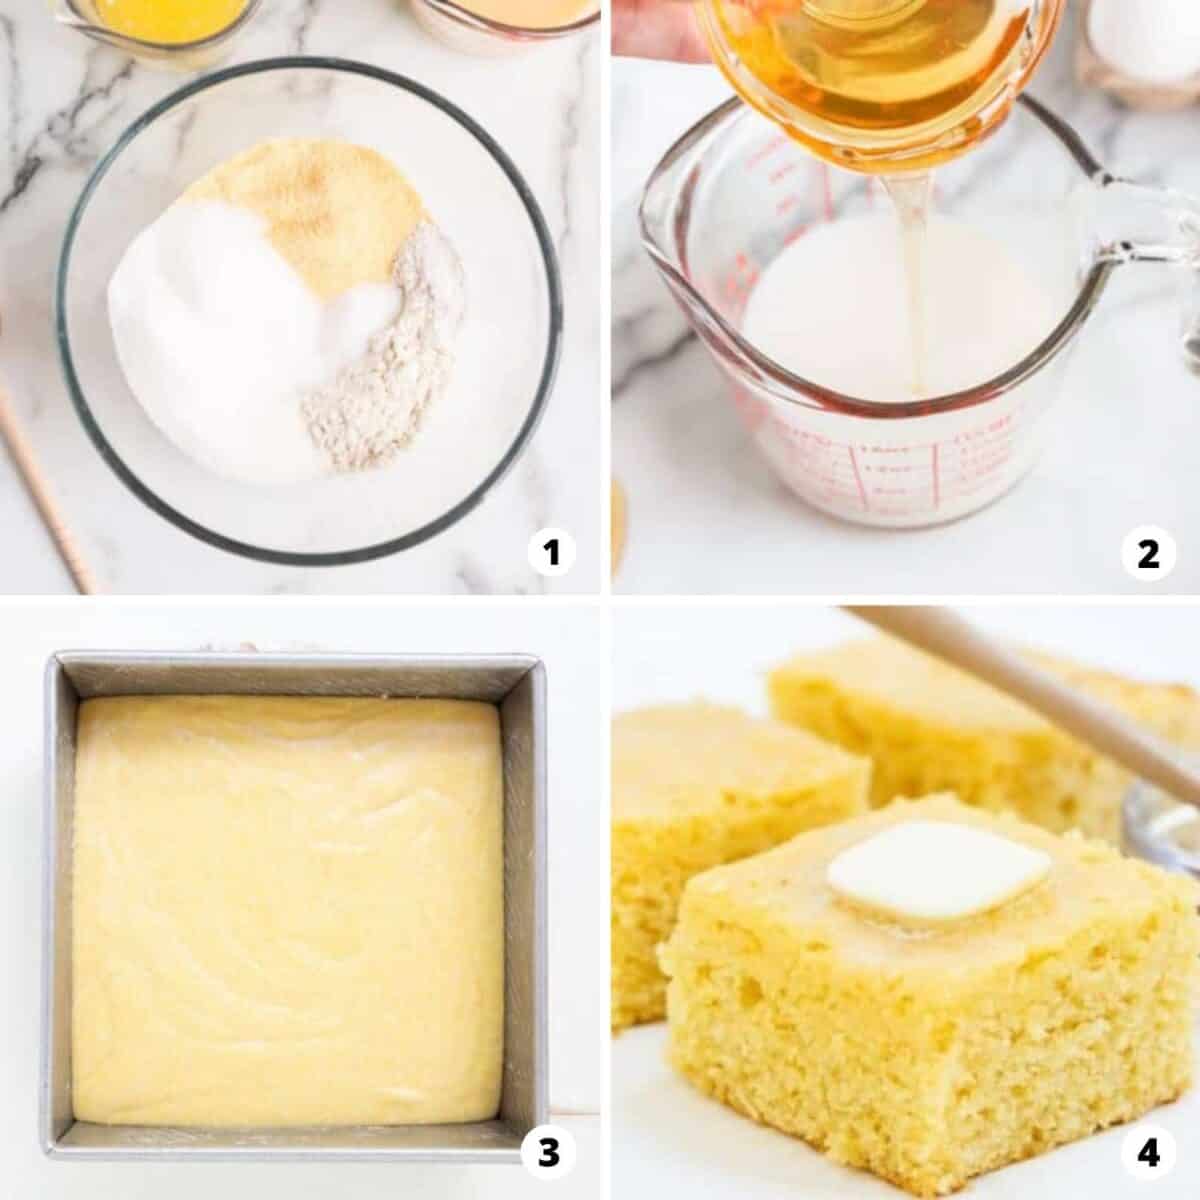 The process of making cornbread in a four step photo collage.